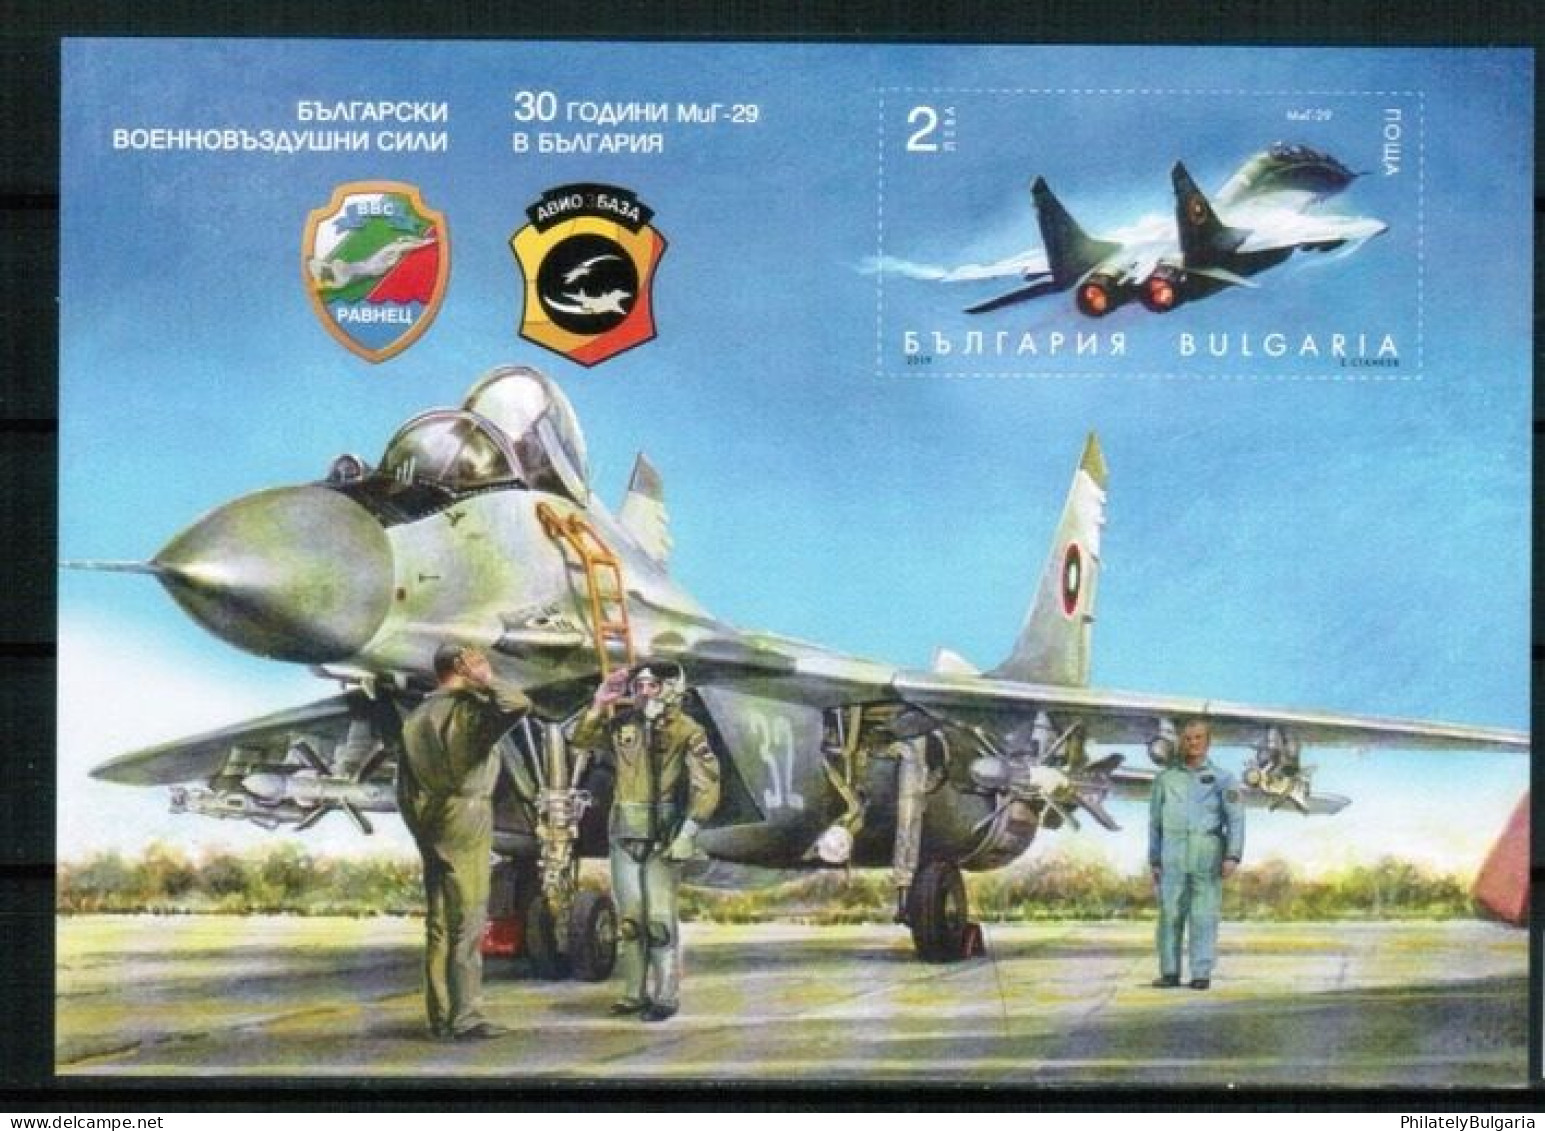 Bulgaria 2019 - 30 Years MiG-29 In The Bulgarian Air Force – Souvenir Sheet Of One Postage Stamp S/S MNH - Ungebraucht